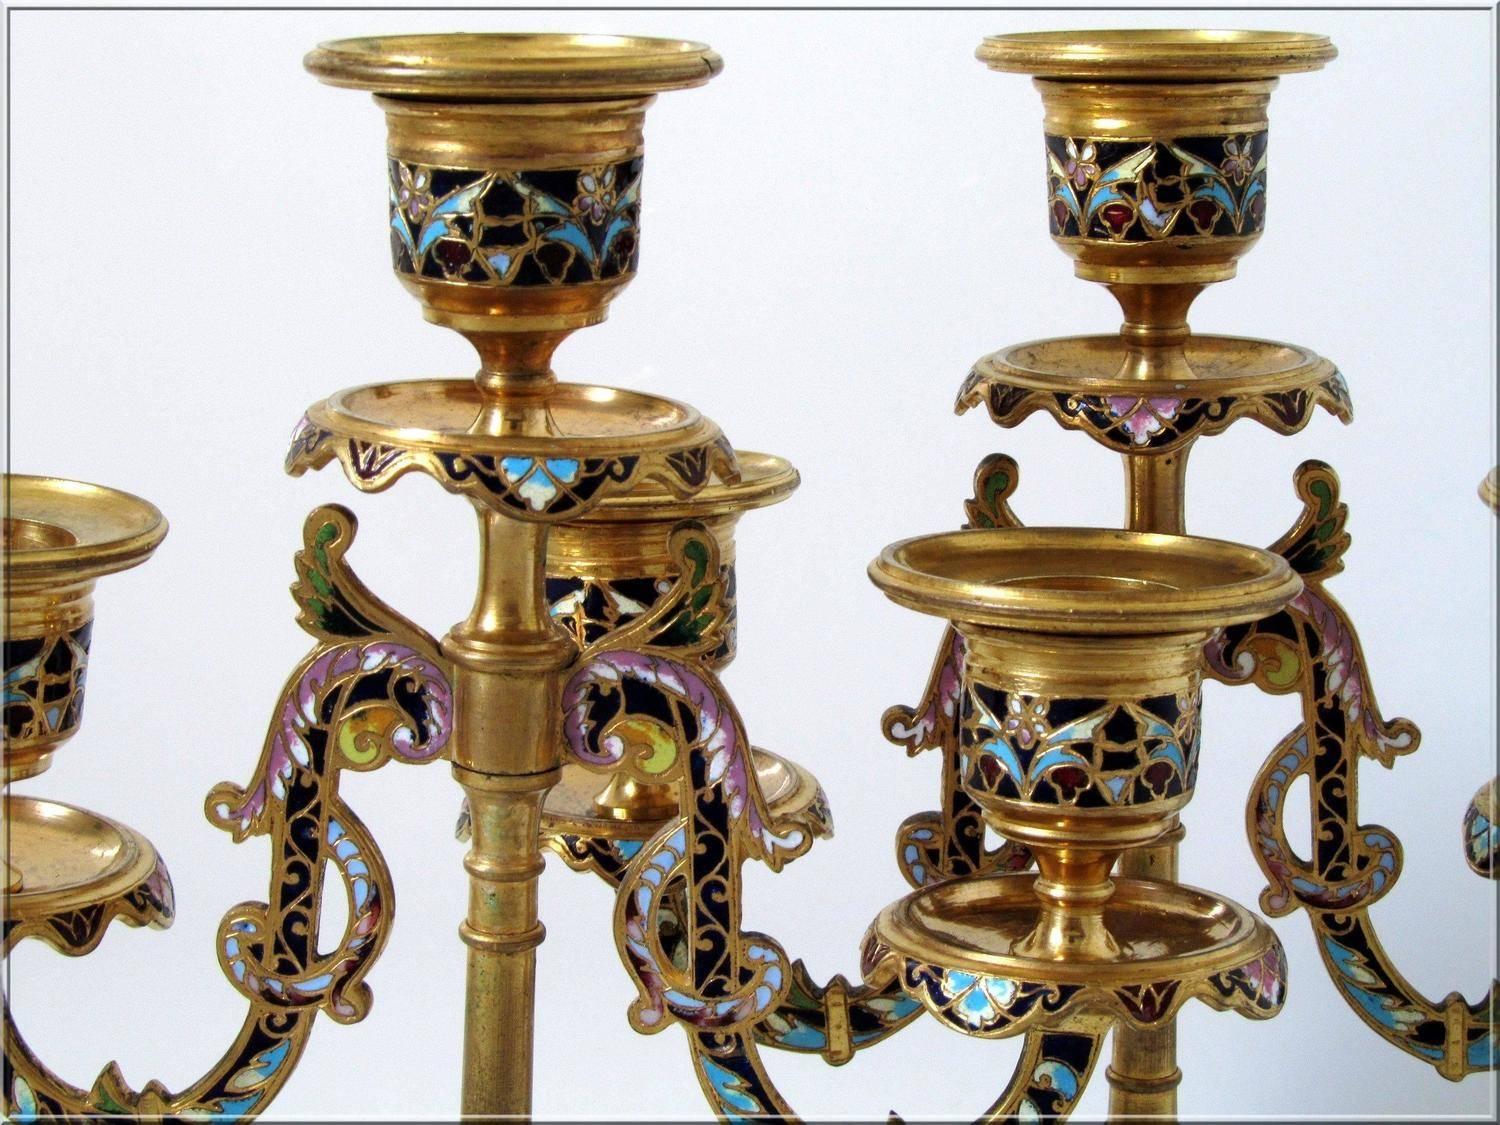 Antique Pair of French Ormolu Bronze Champleve Enamel Candelabra For Sale 5